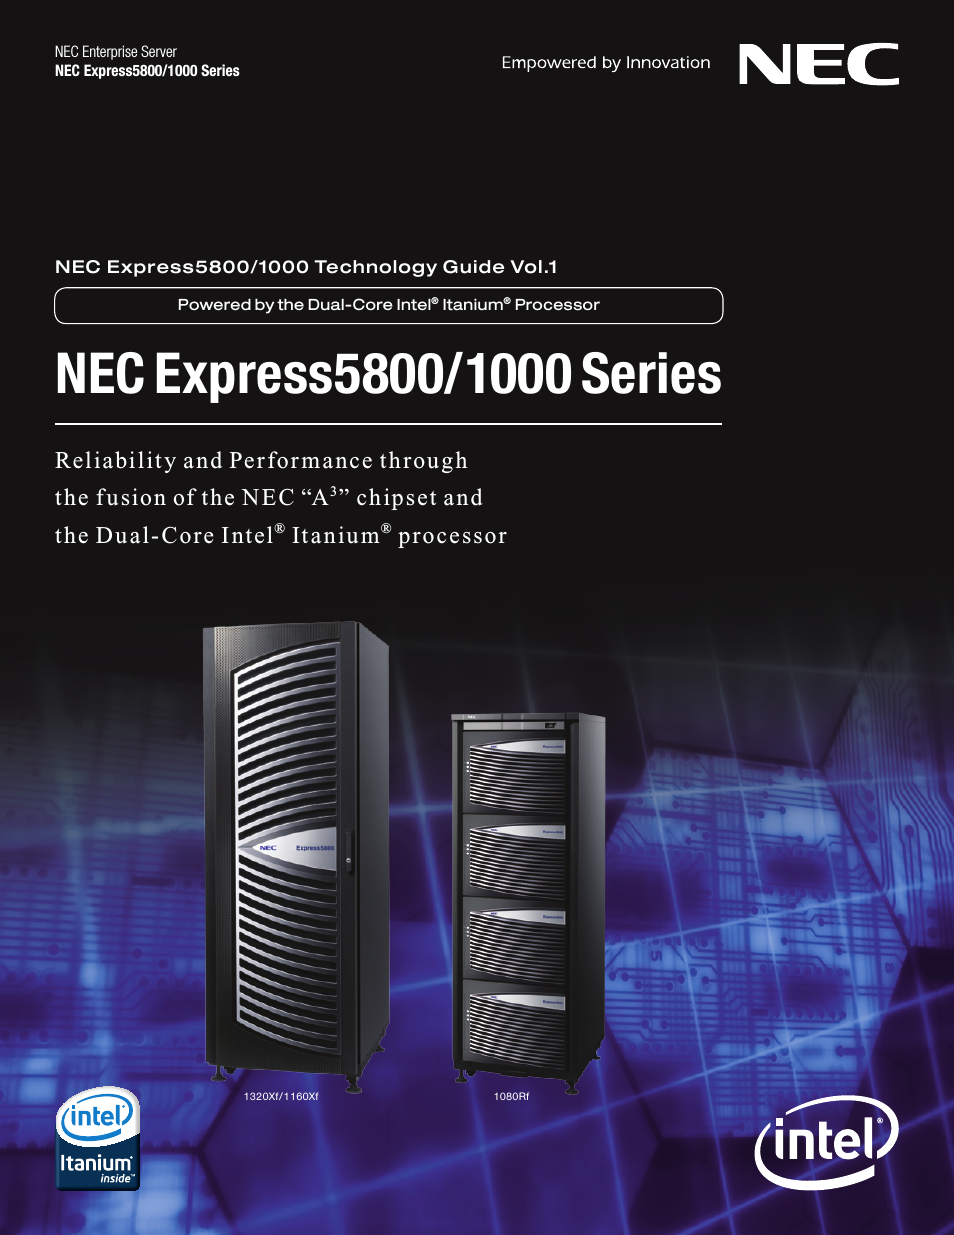 1000 Series (Page 1)